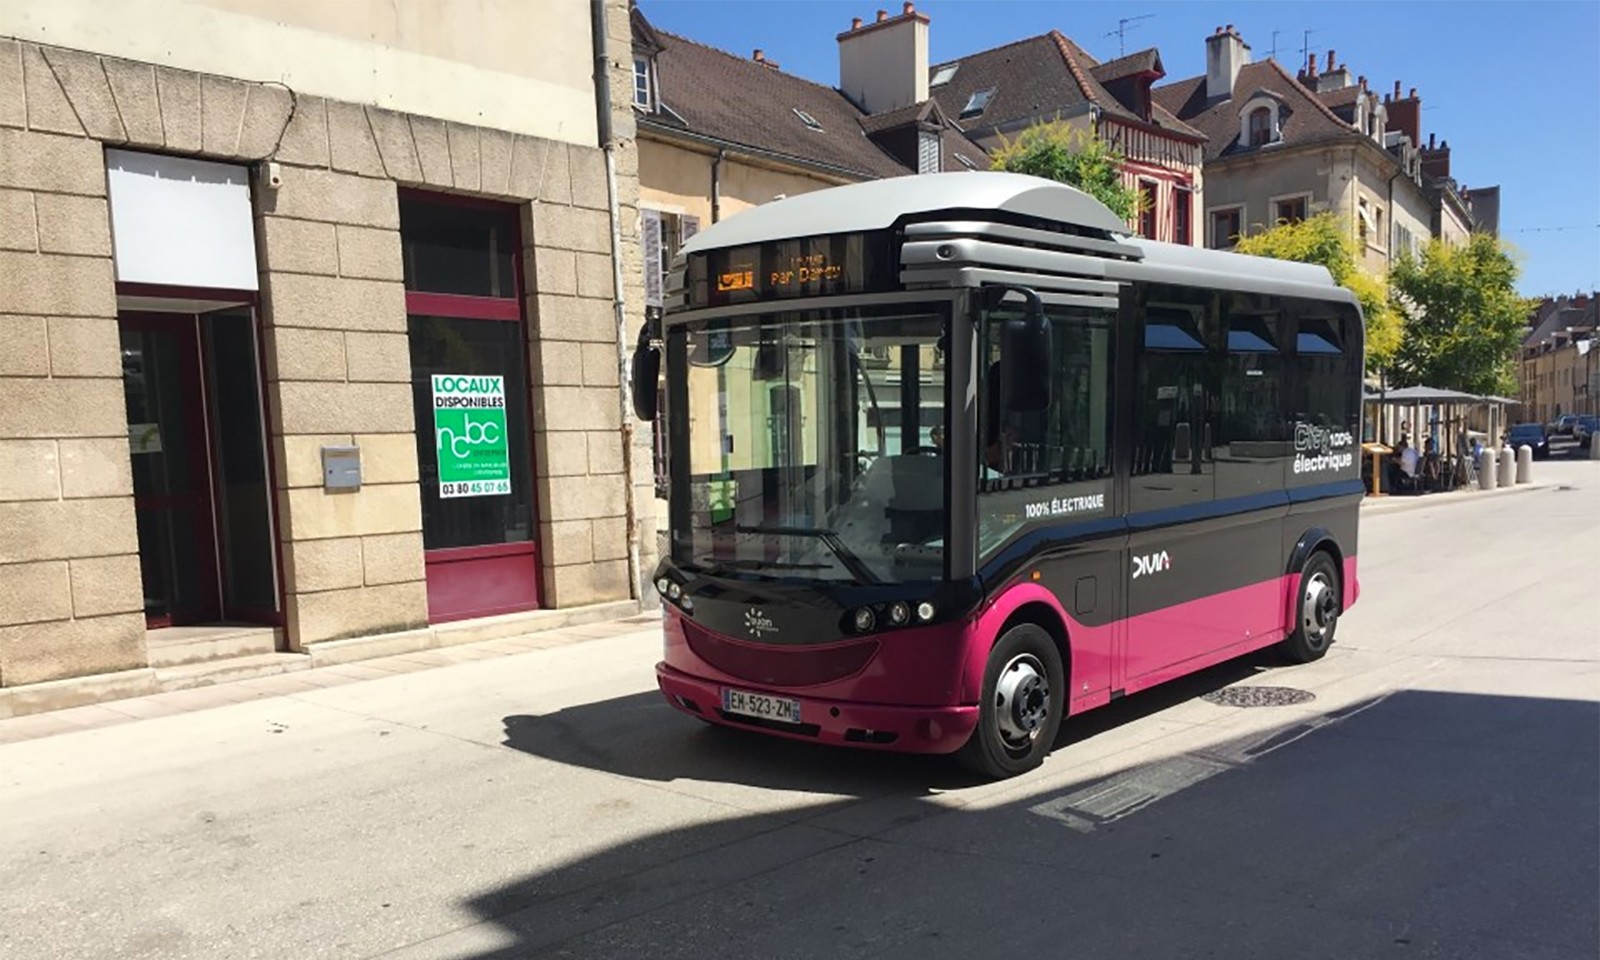 Ride-sharing comes in many forms, including micro-transit as shown in Dijon, France.